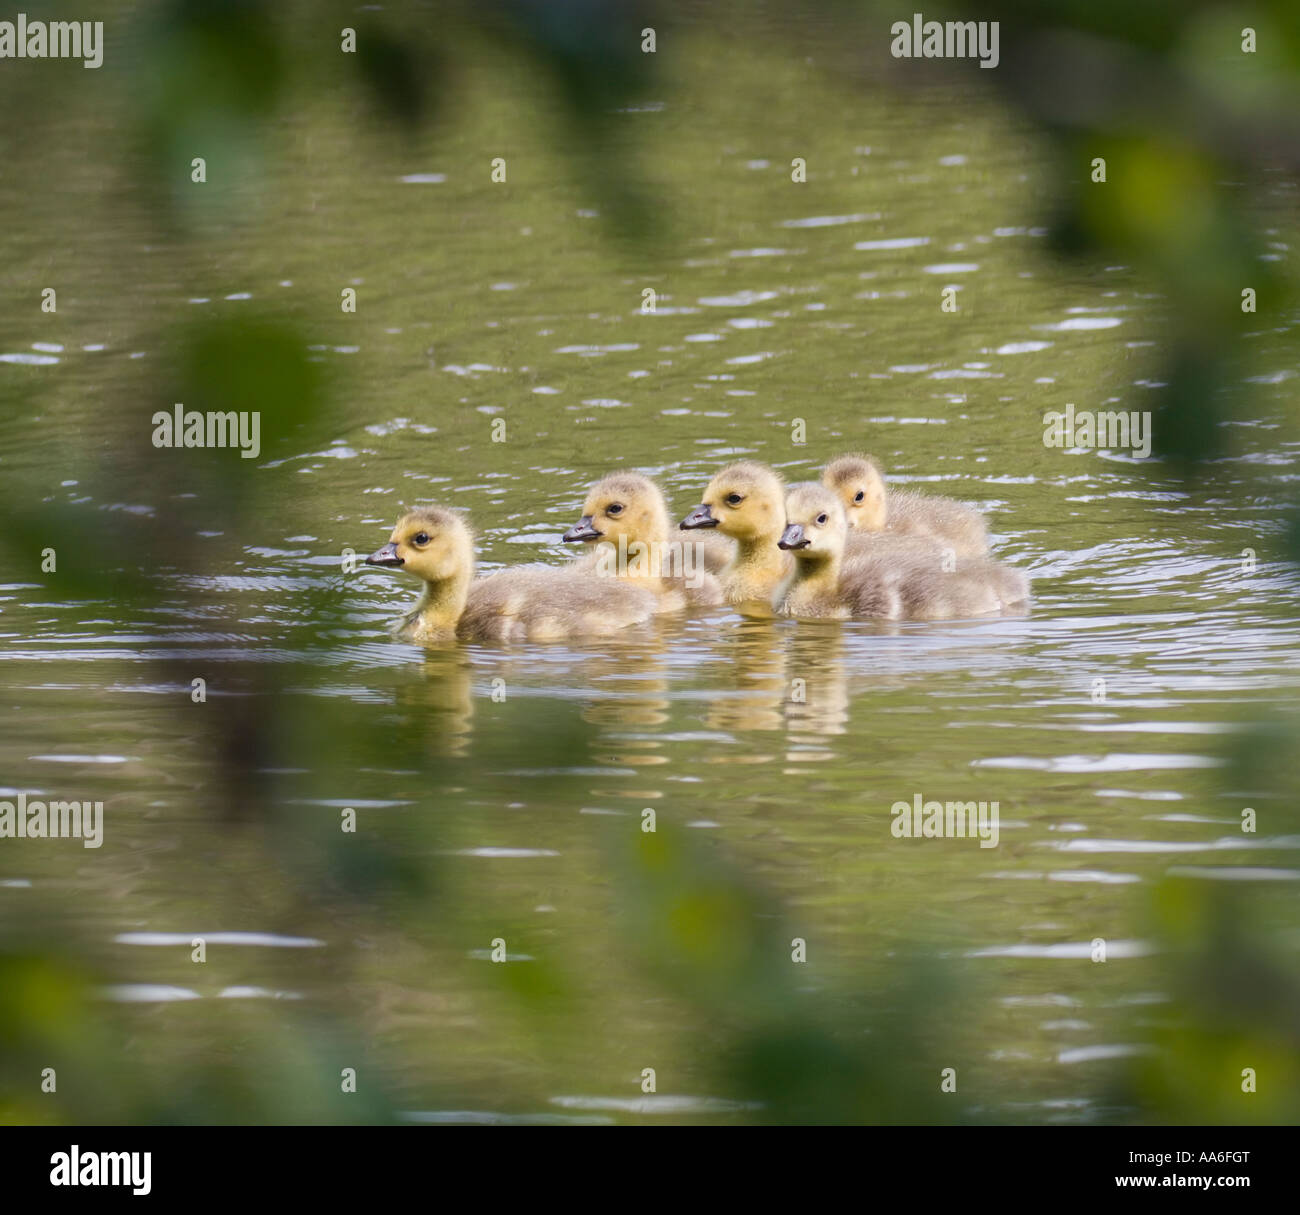 Five Canada goose goslings (Branta canadensis) swimming on a pond Stock Photo